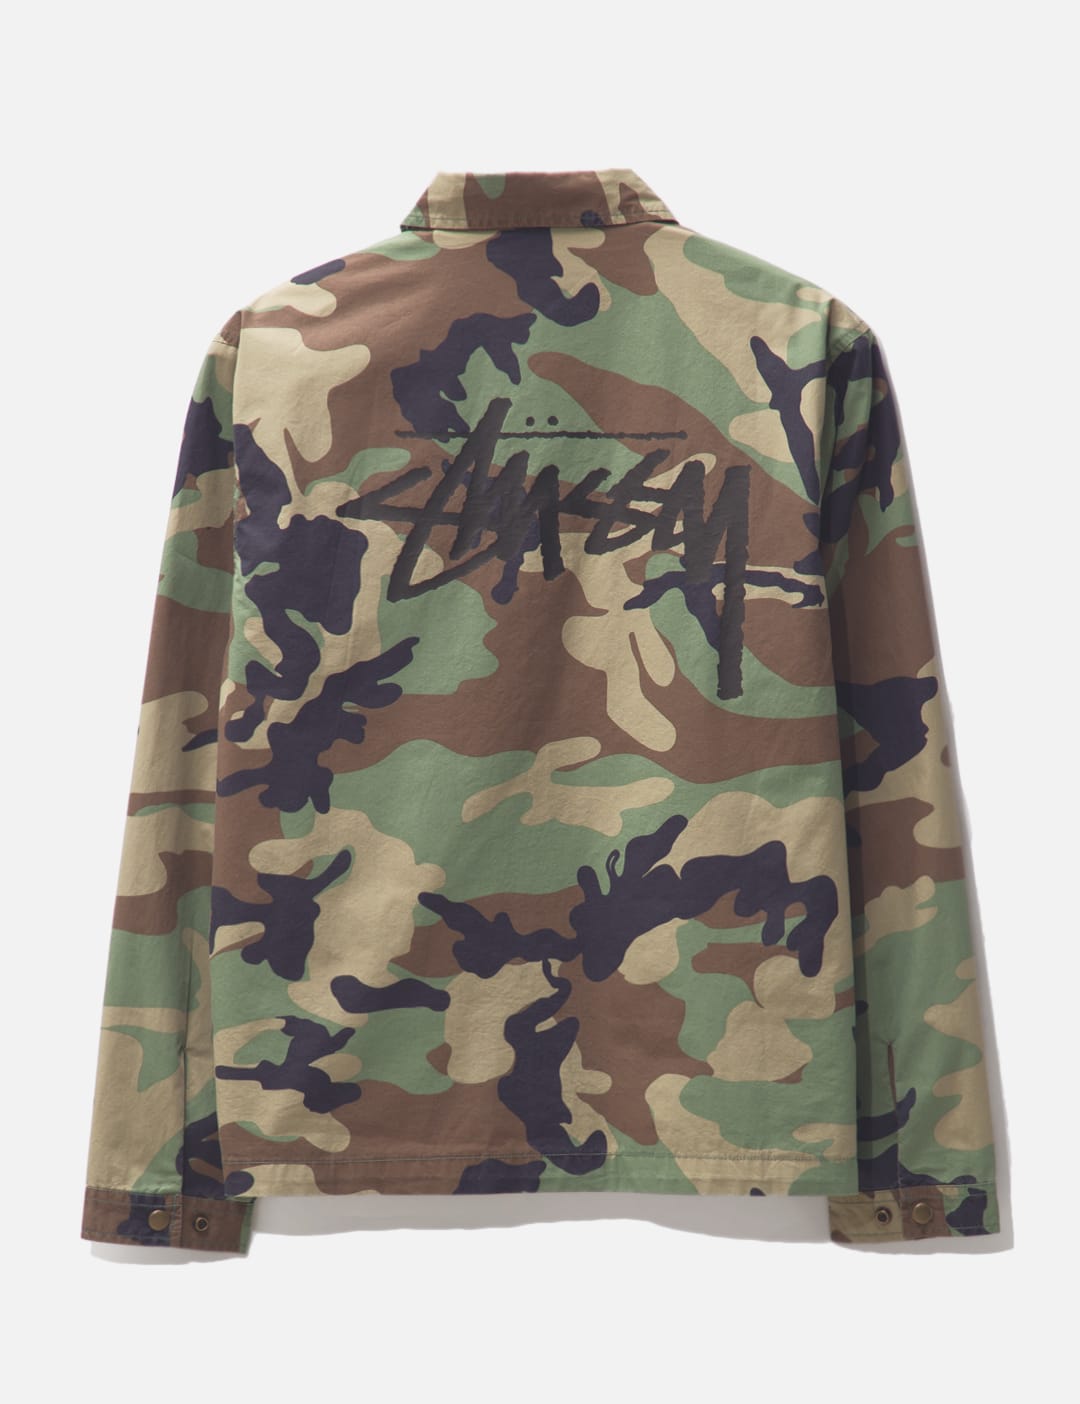 Stüssy - Coach Shirt | HBX - Globally Curated Fashion and